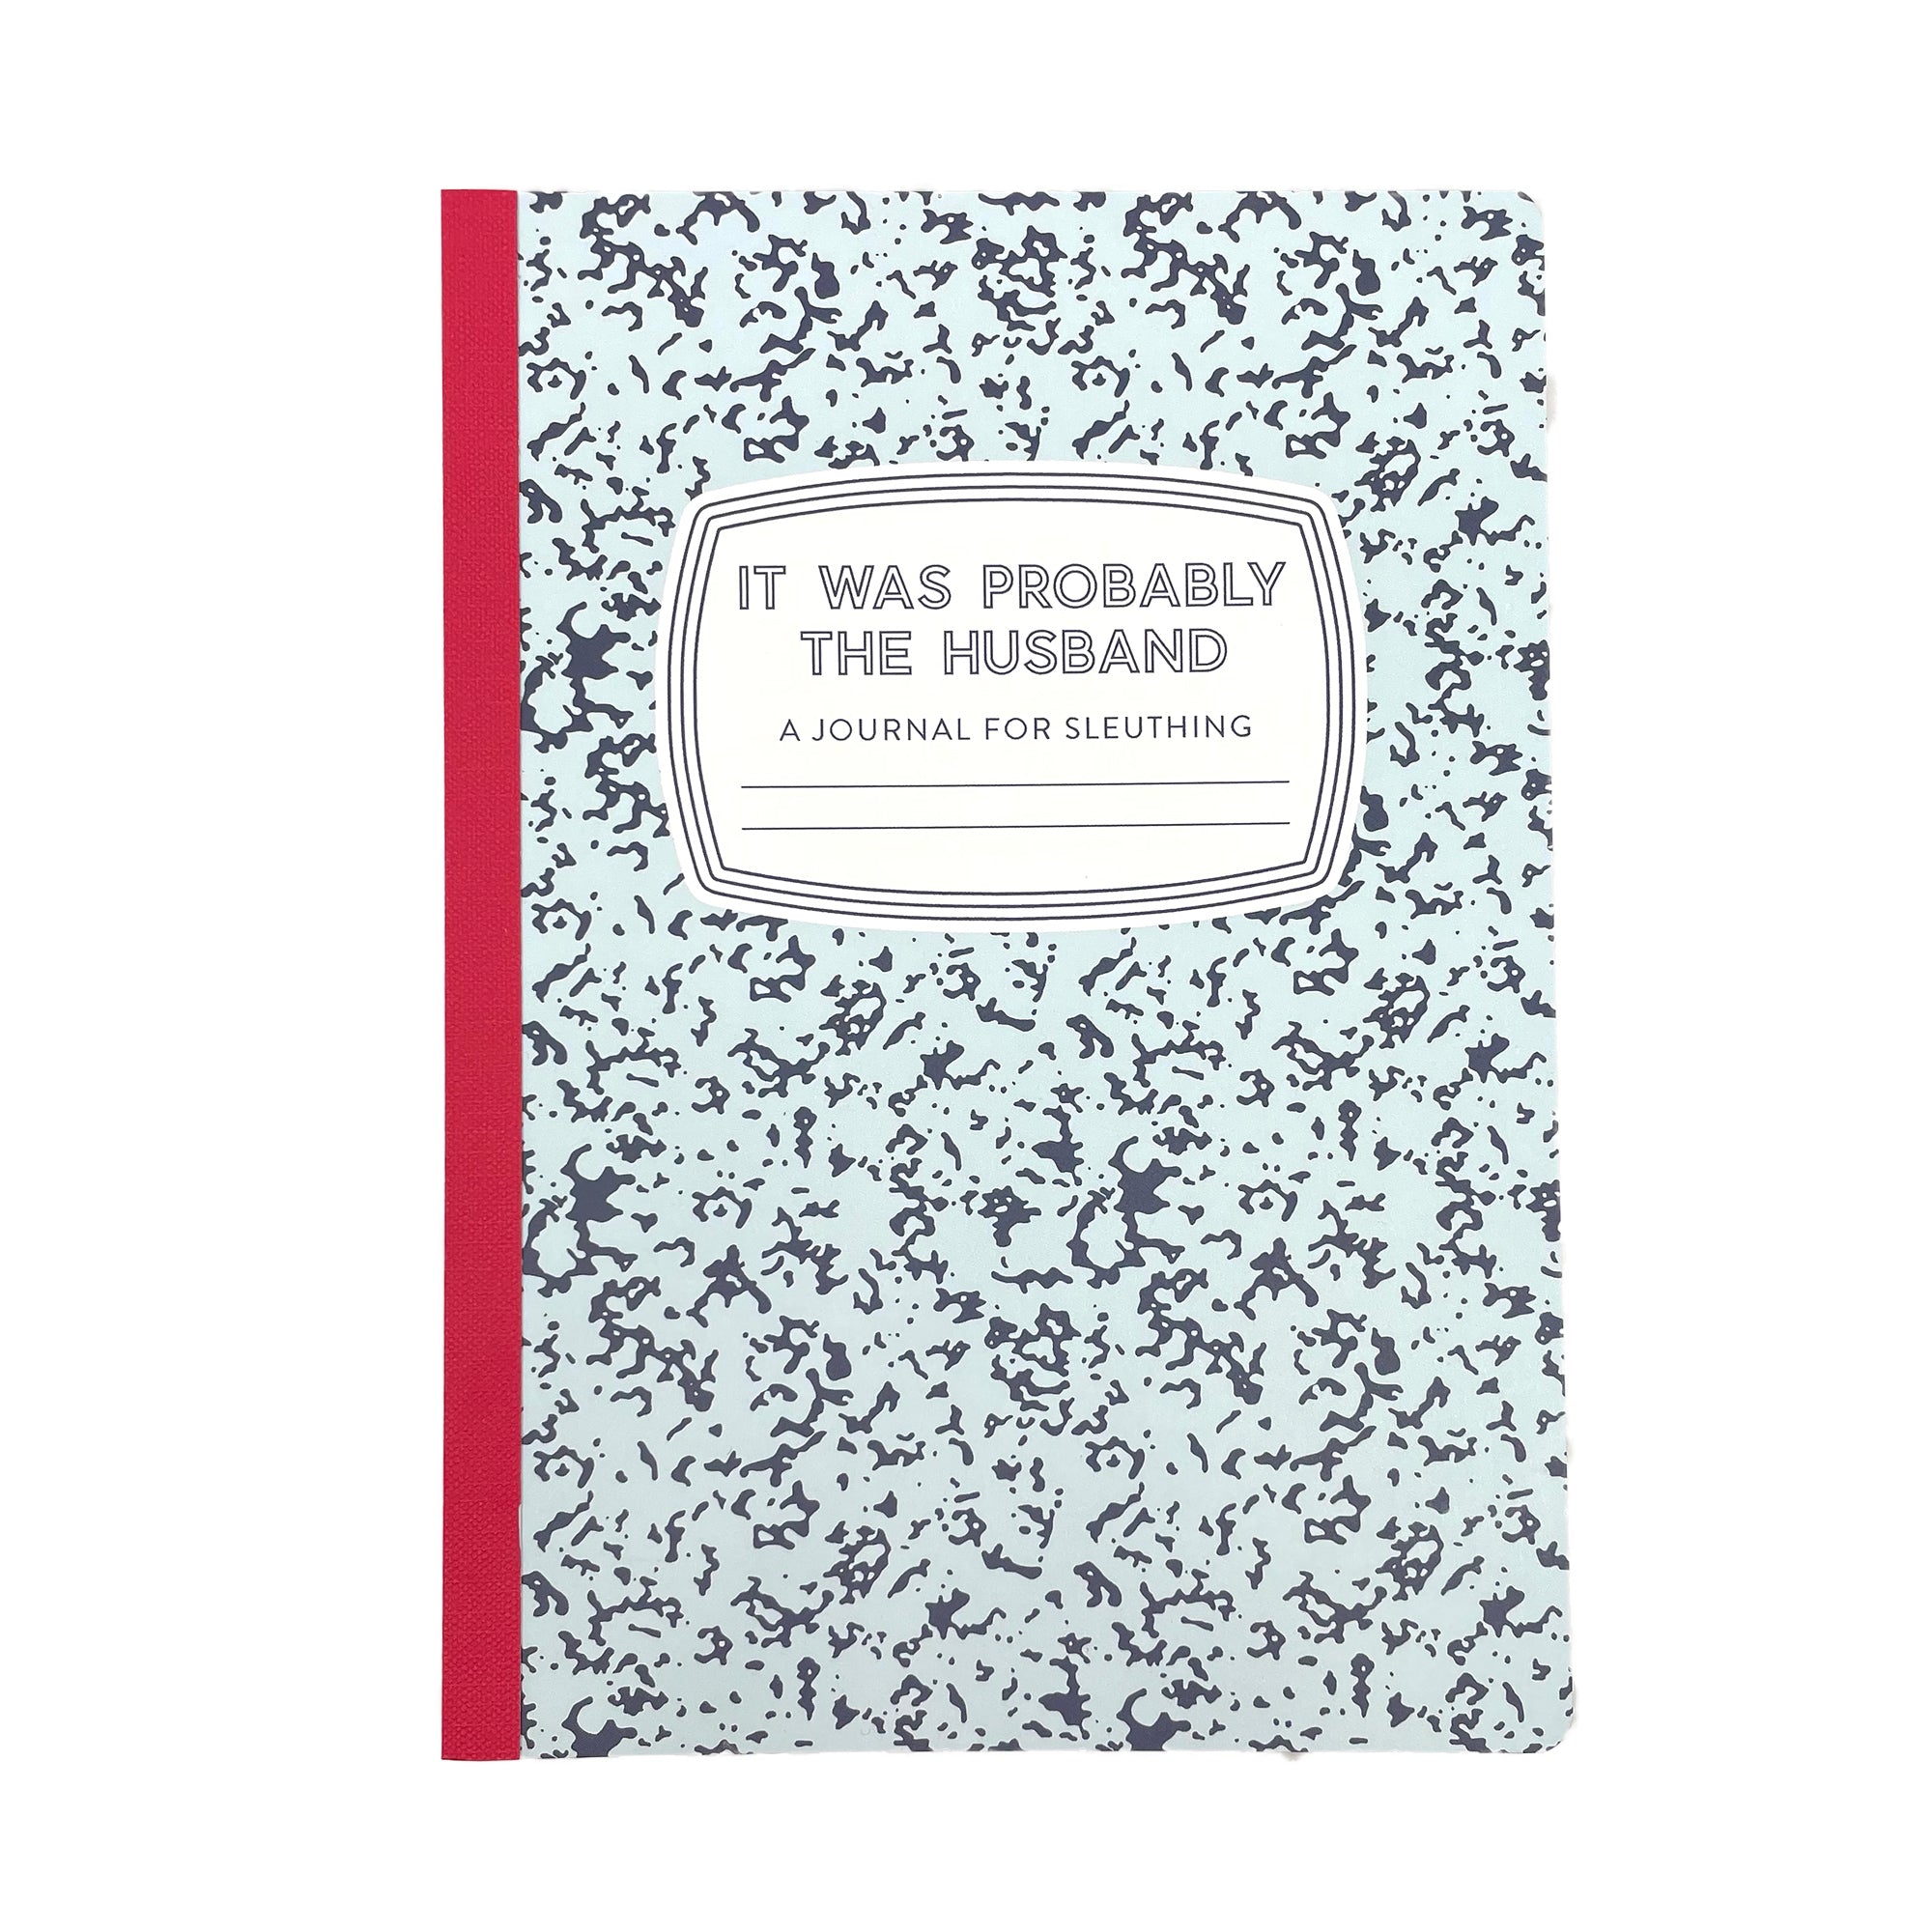 It Was Probably the Husband: A Journal for Sleuthing